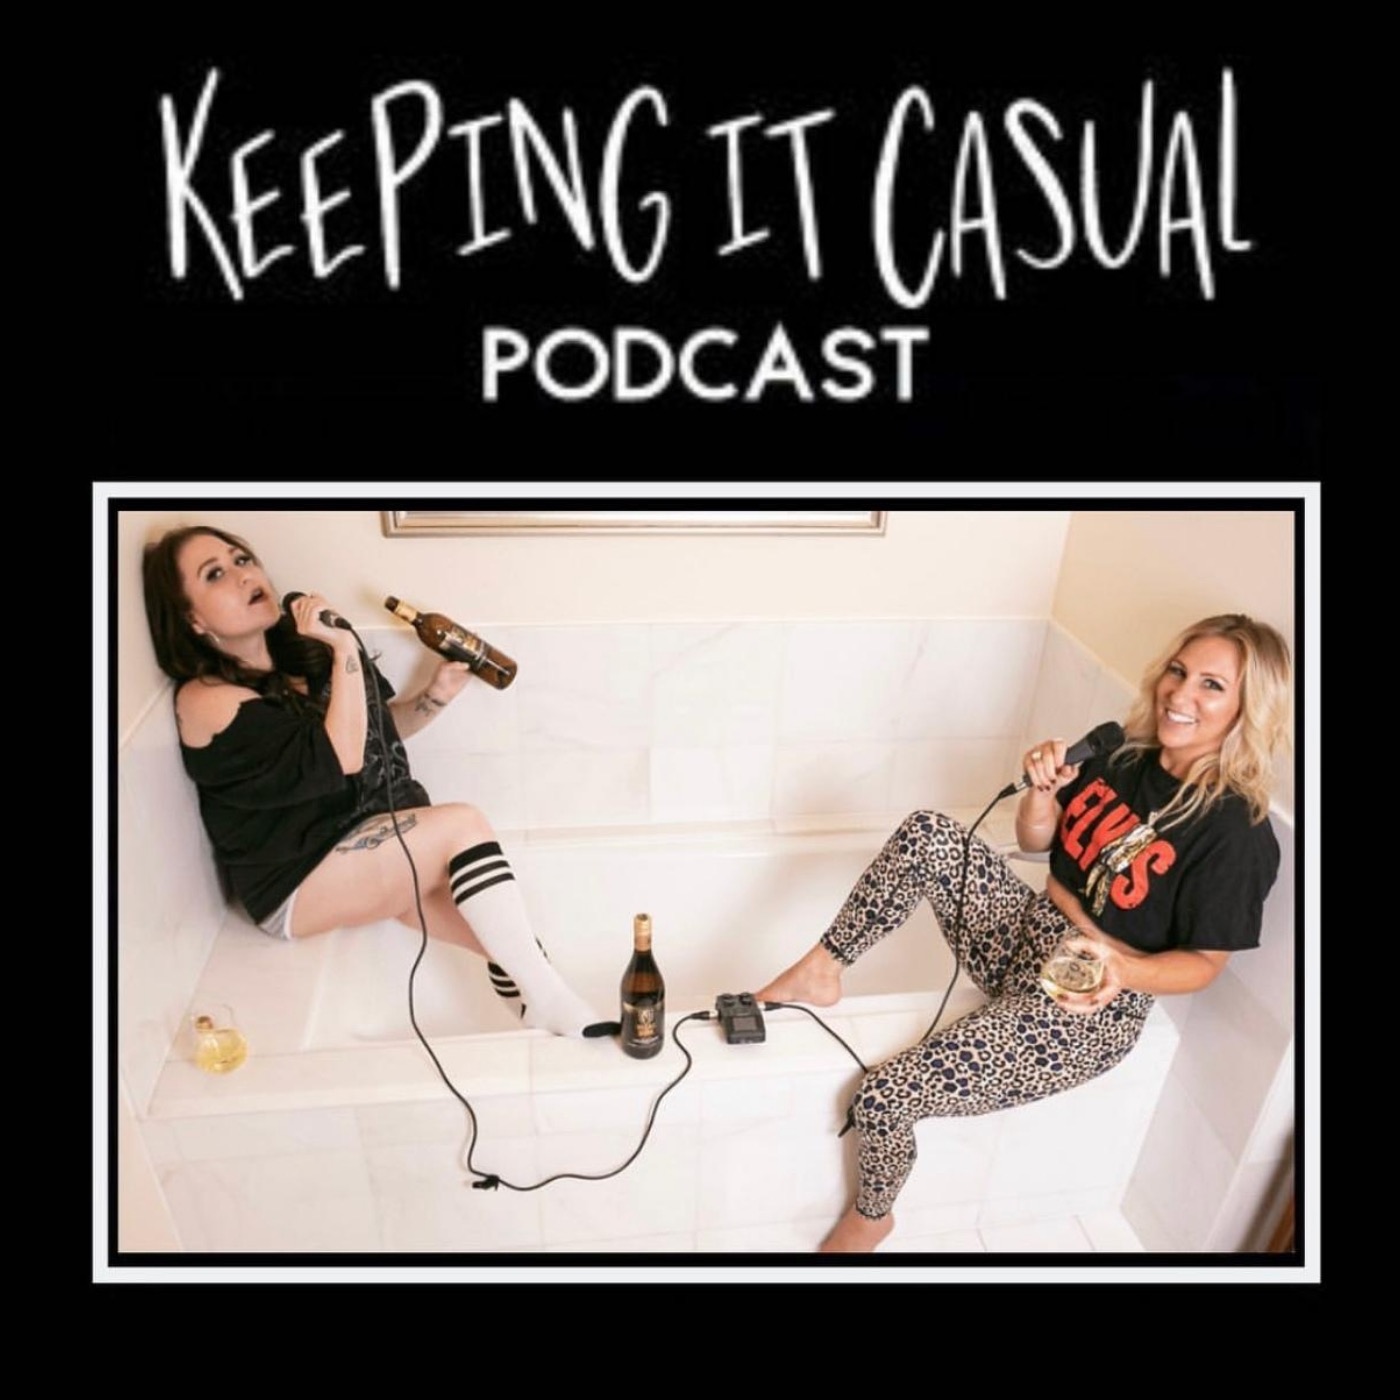 EPISODE 161 - KEEPING IT CASUAL GAME NIGHT